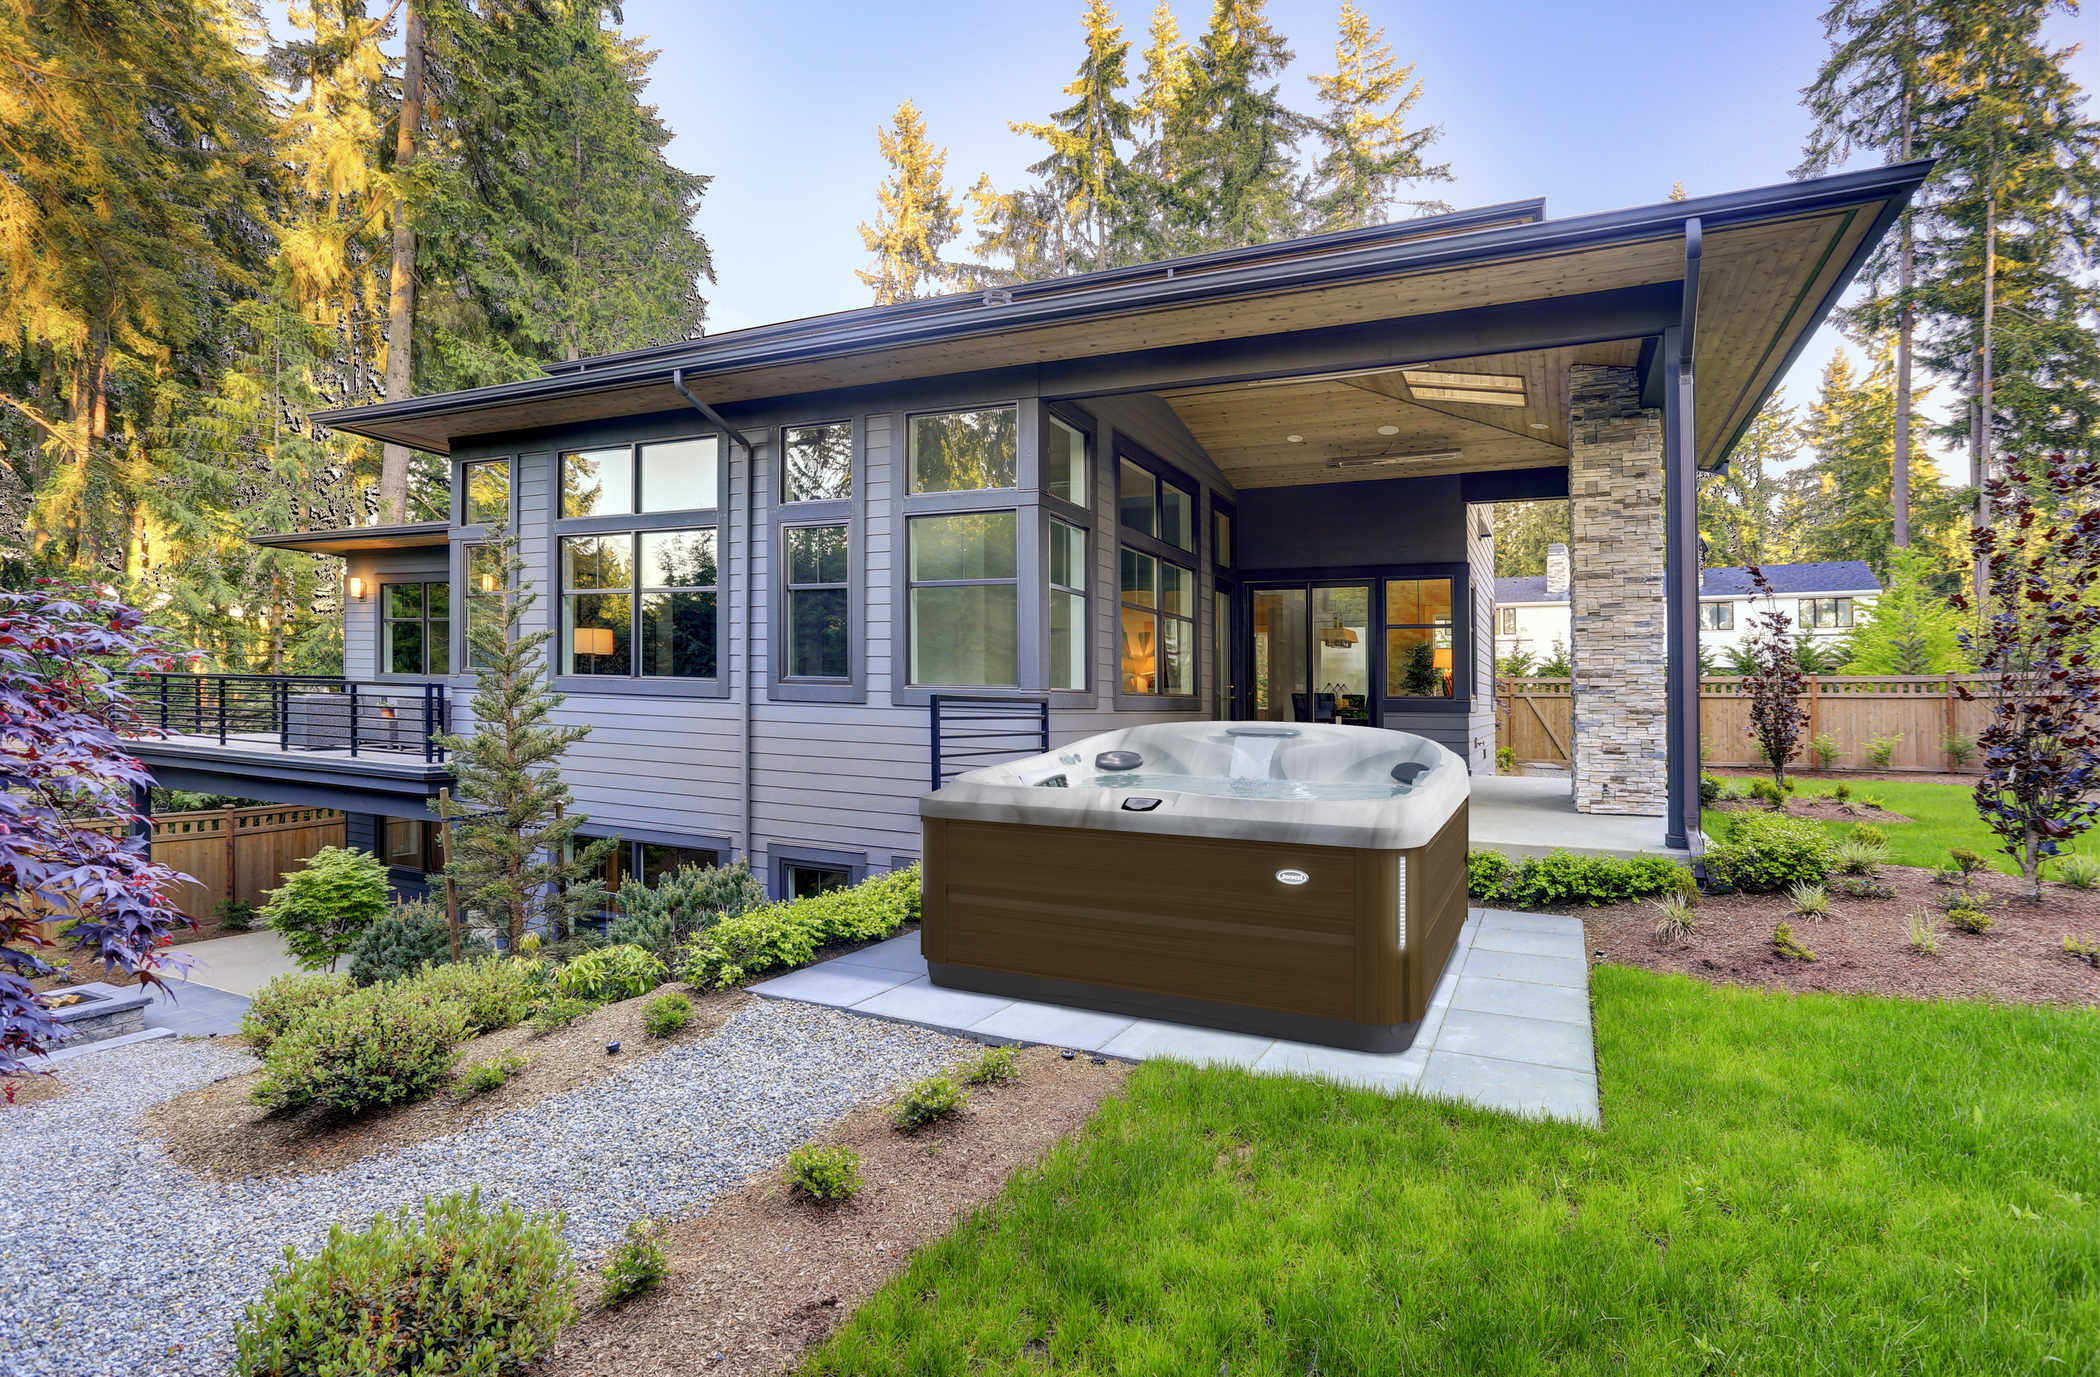 20 Places To Get Deals On Backyard Hot Tub Privacy